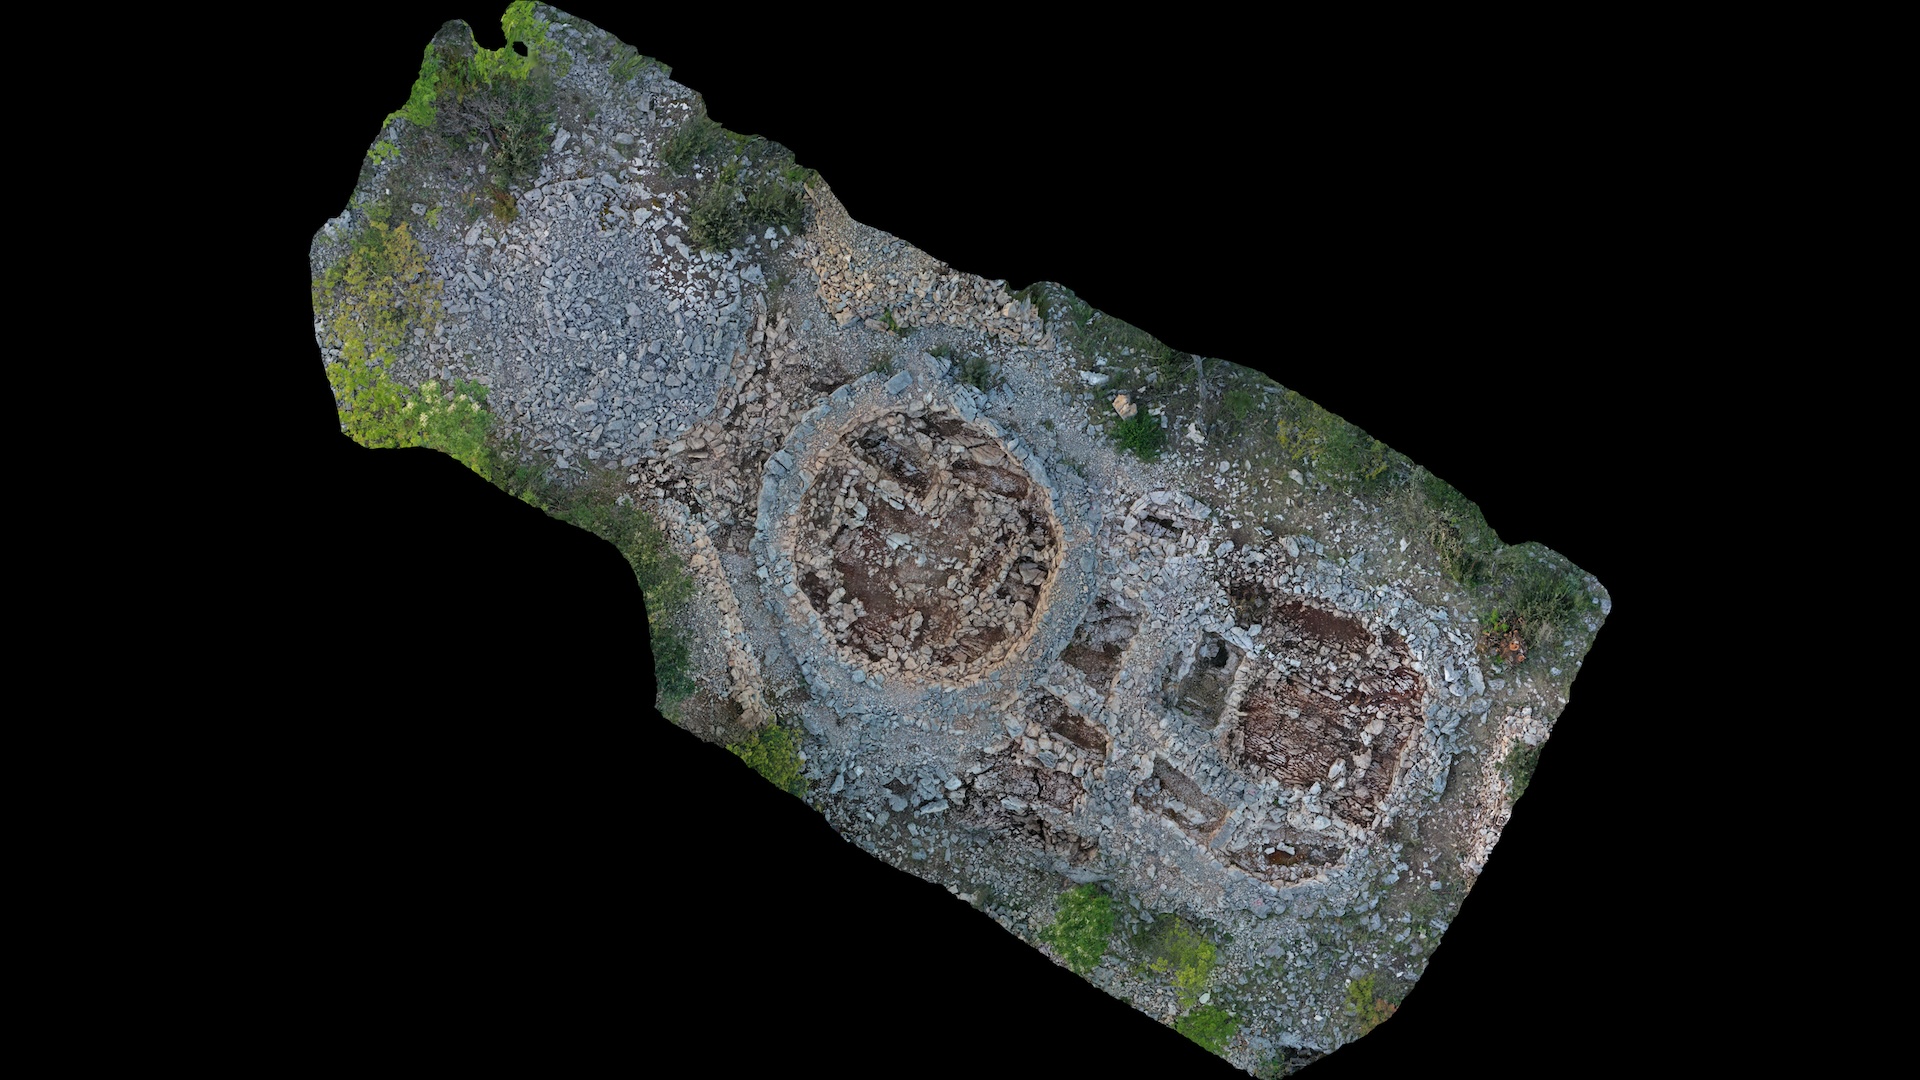 3D model of burial mound. We see a rectangular image with three circular mounds, two of which are excavated.